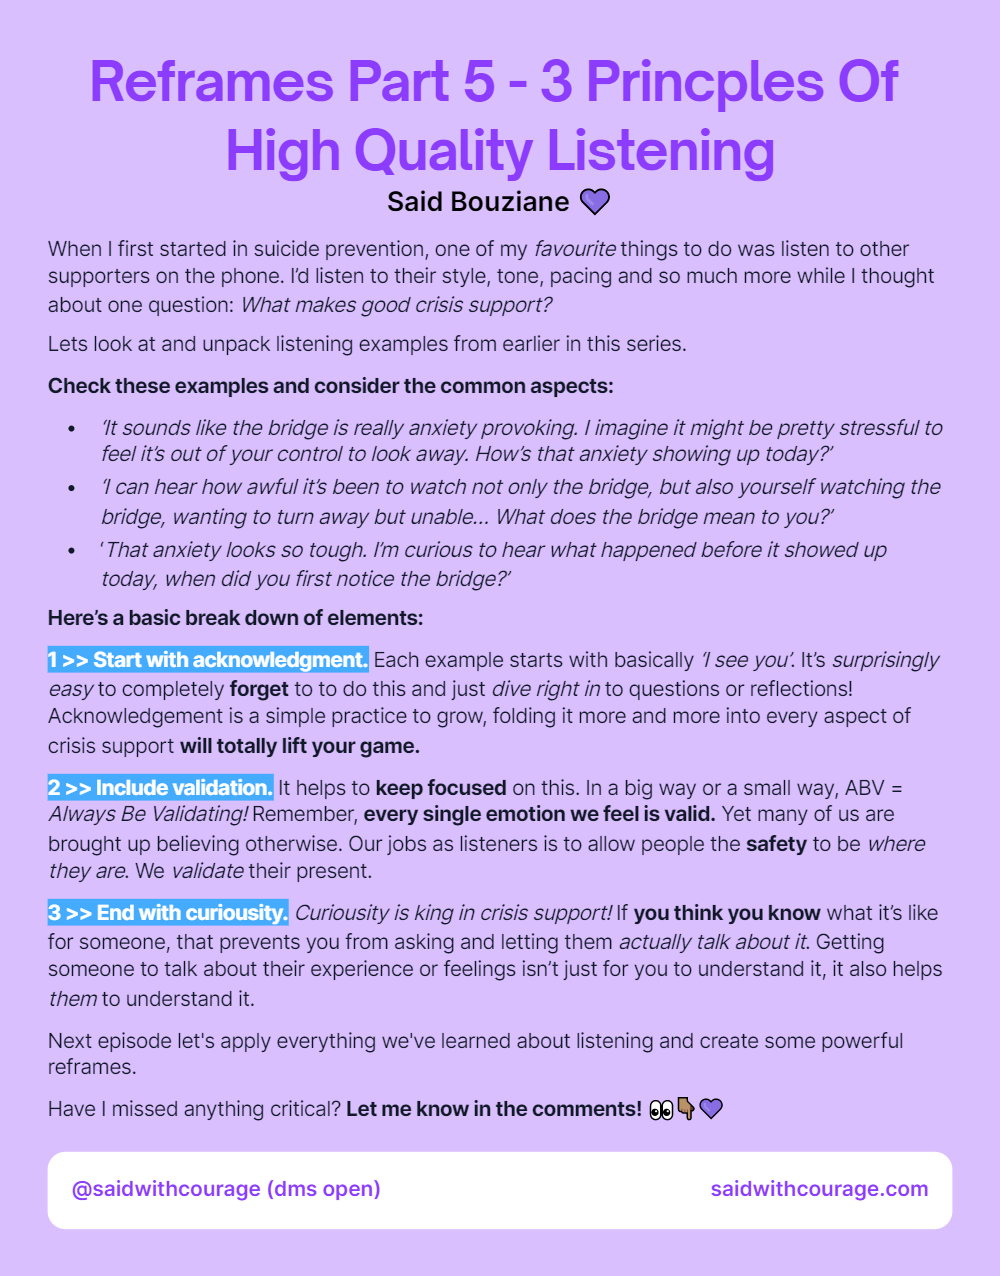 Reframes Part 5 – 3 Principles Of High Quality Listening